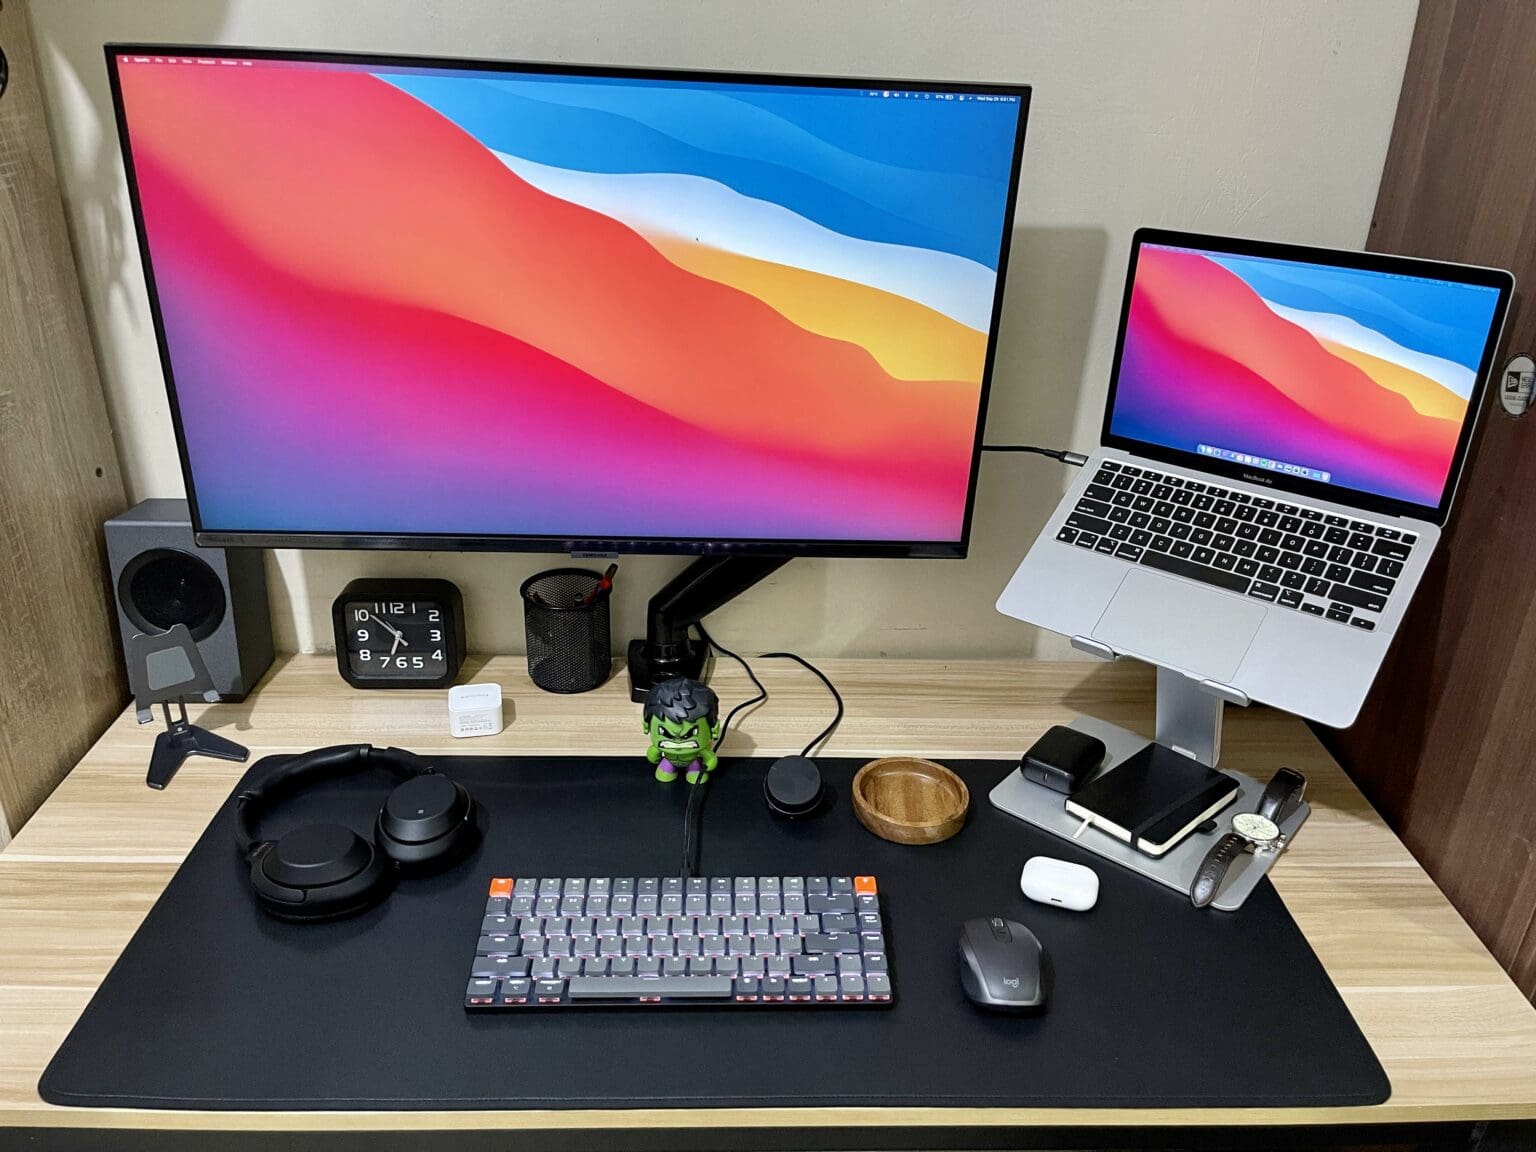 When you don't a big desk, stands for monitor and laptop are great space-savers.